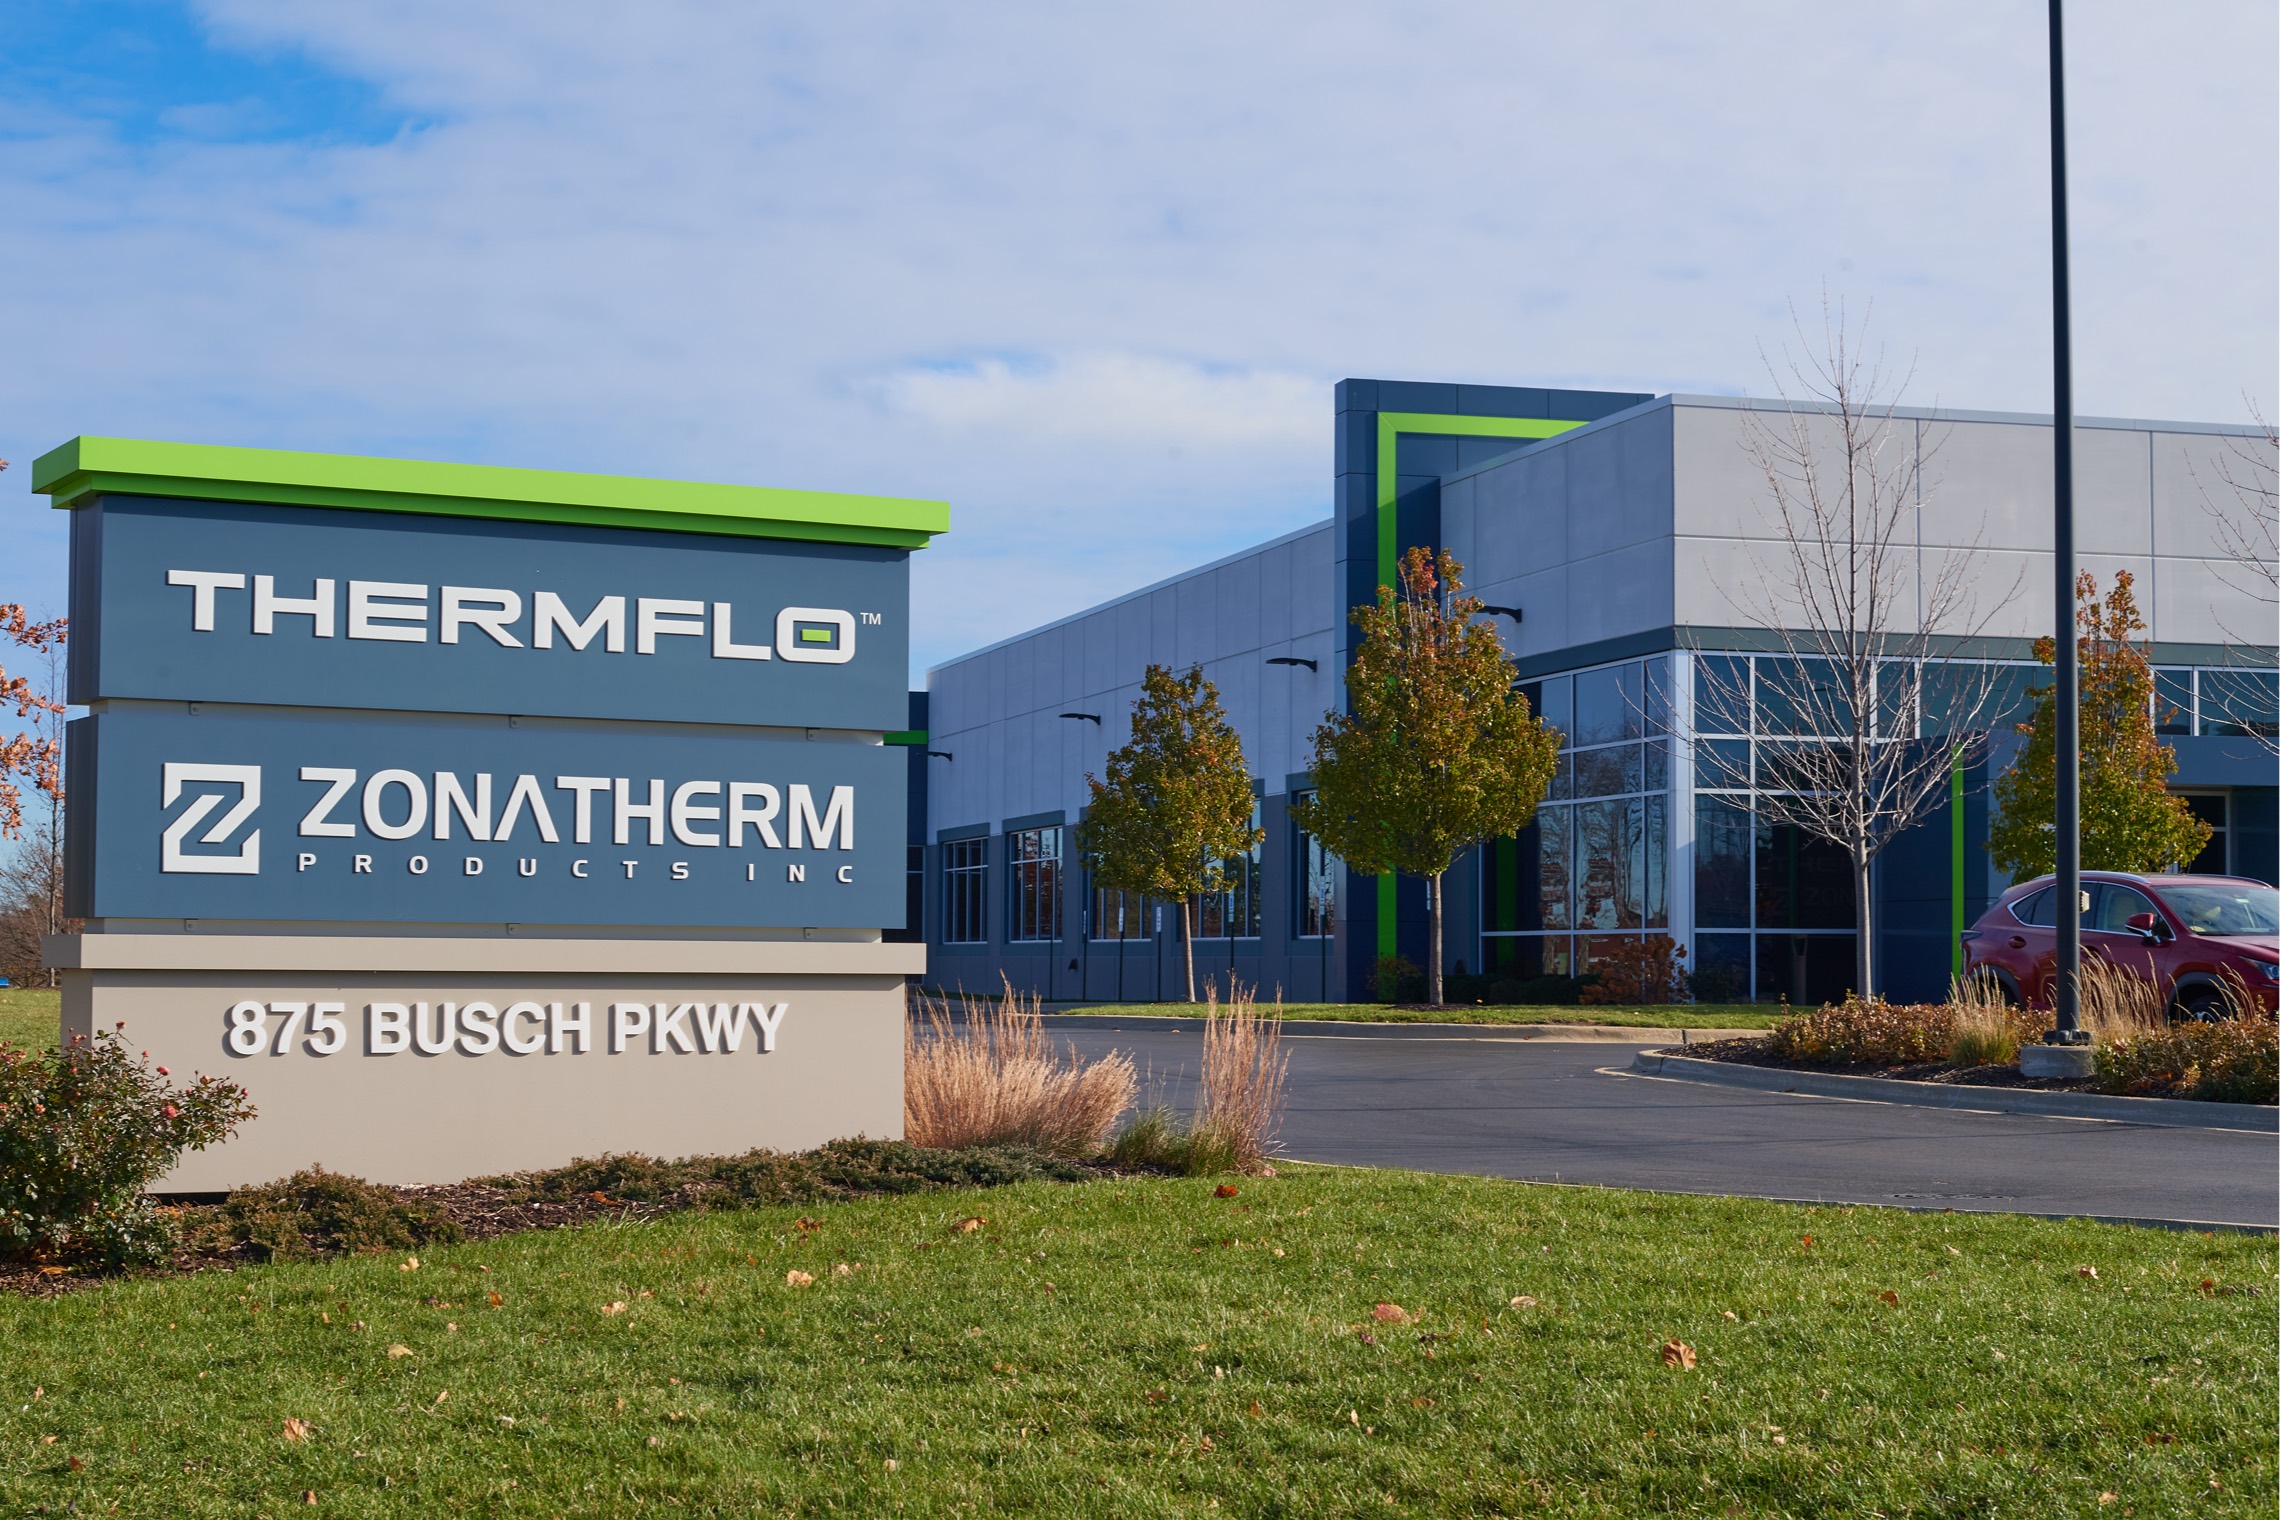 Exterior of Zonatherm and ThermFlo office building located in Buffalo Grove, IL